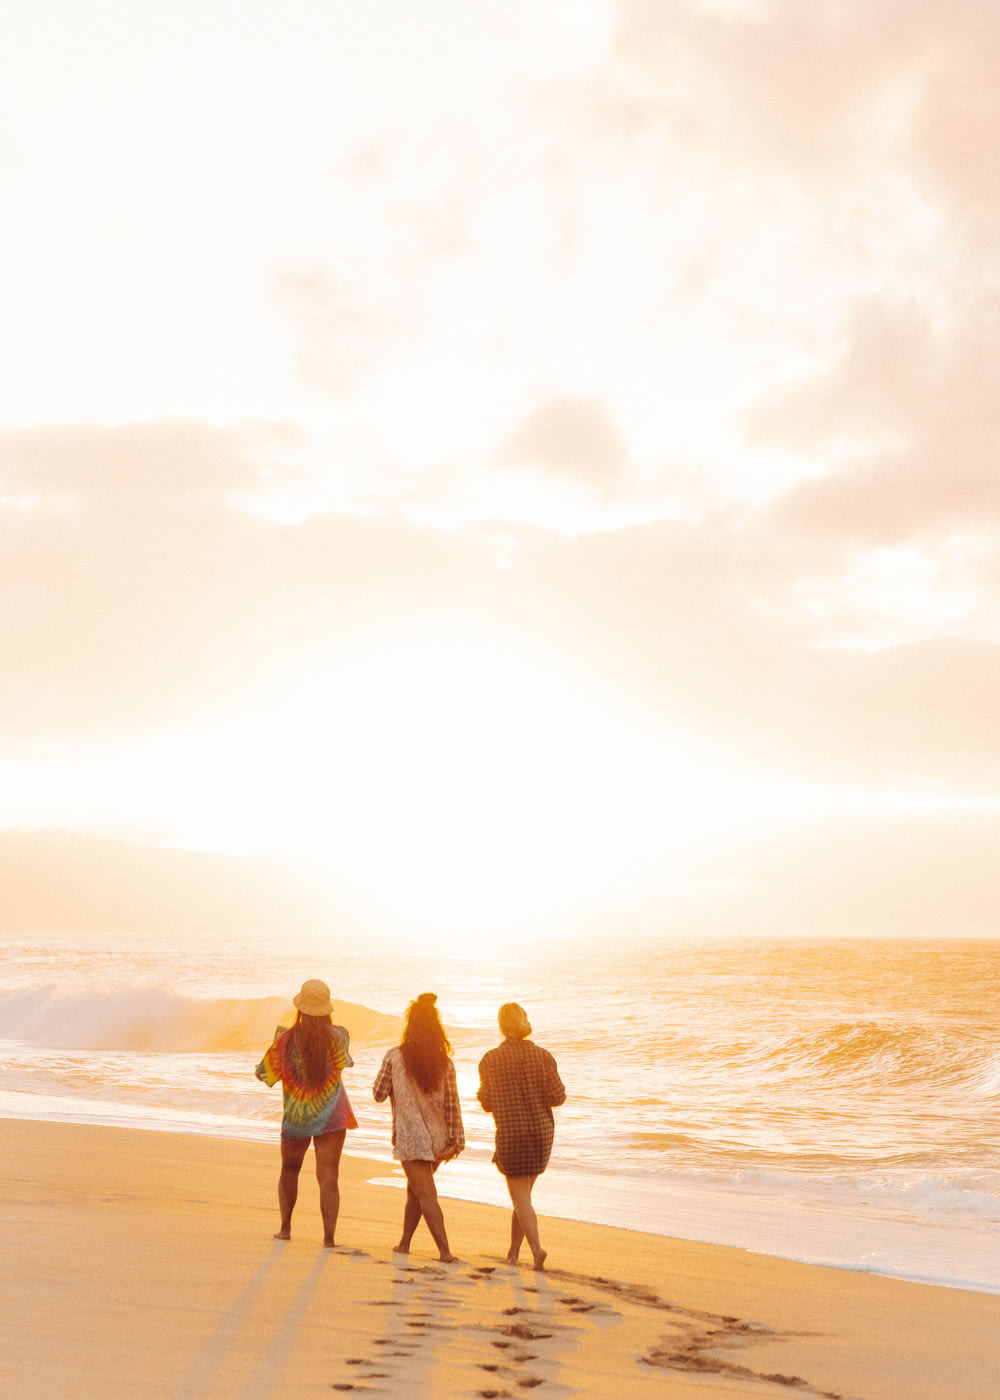 3 women and man standing on beach during sunset